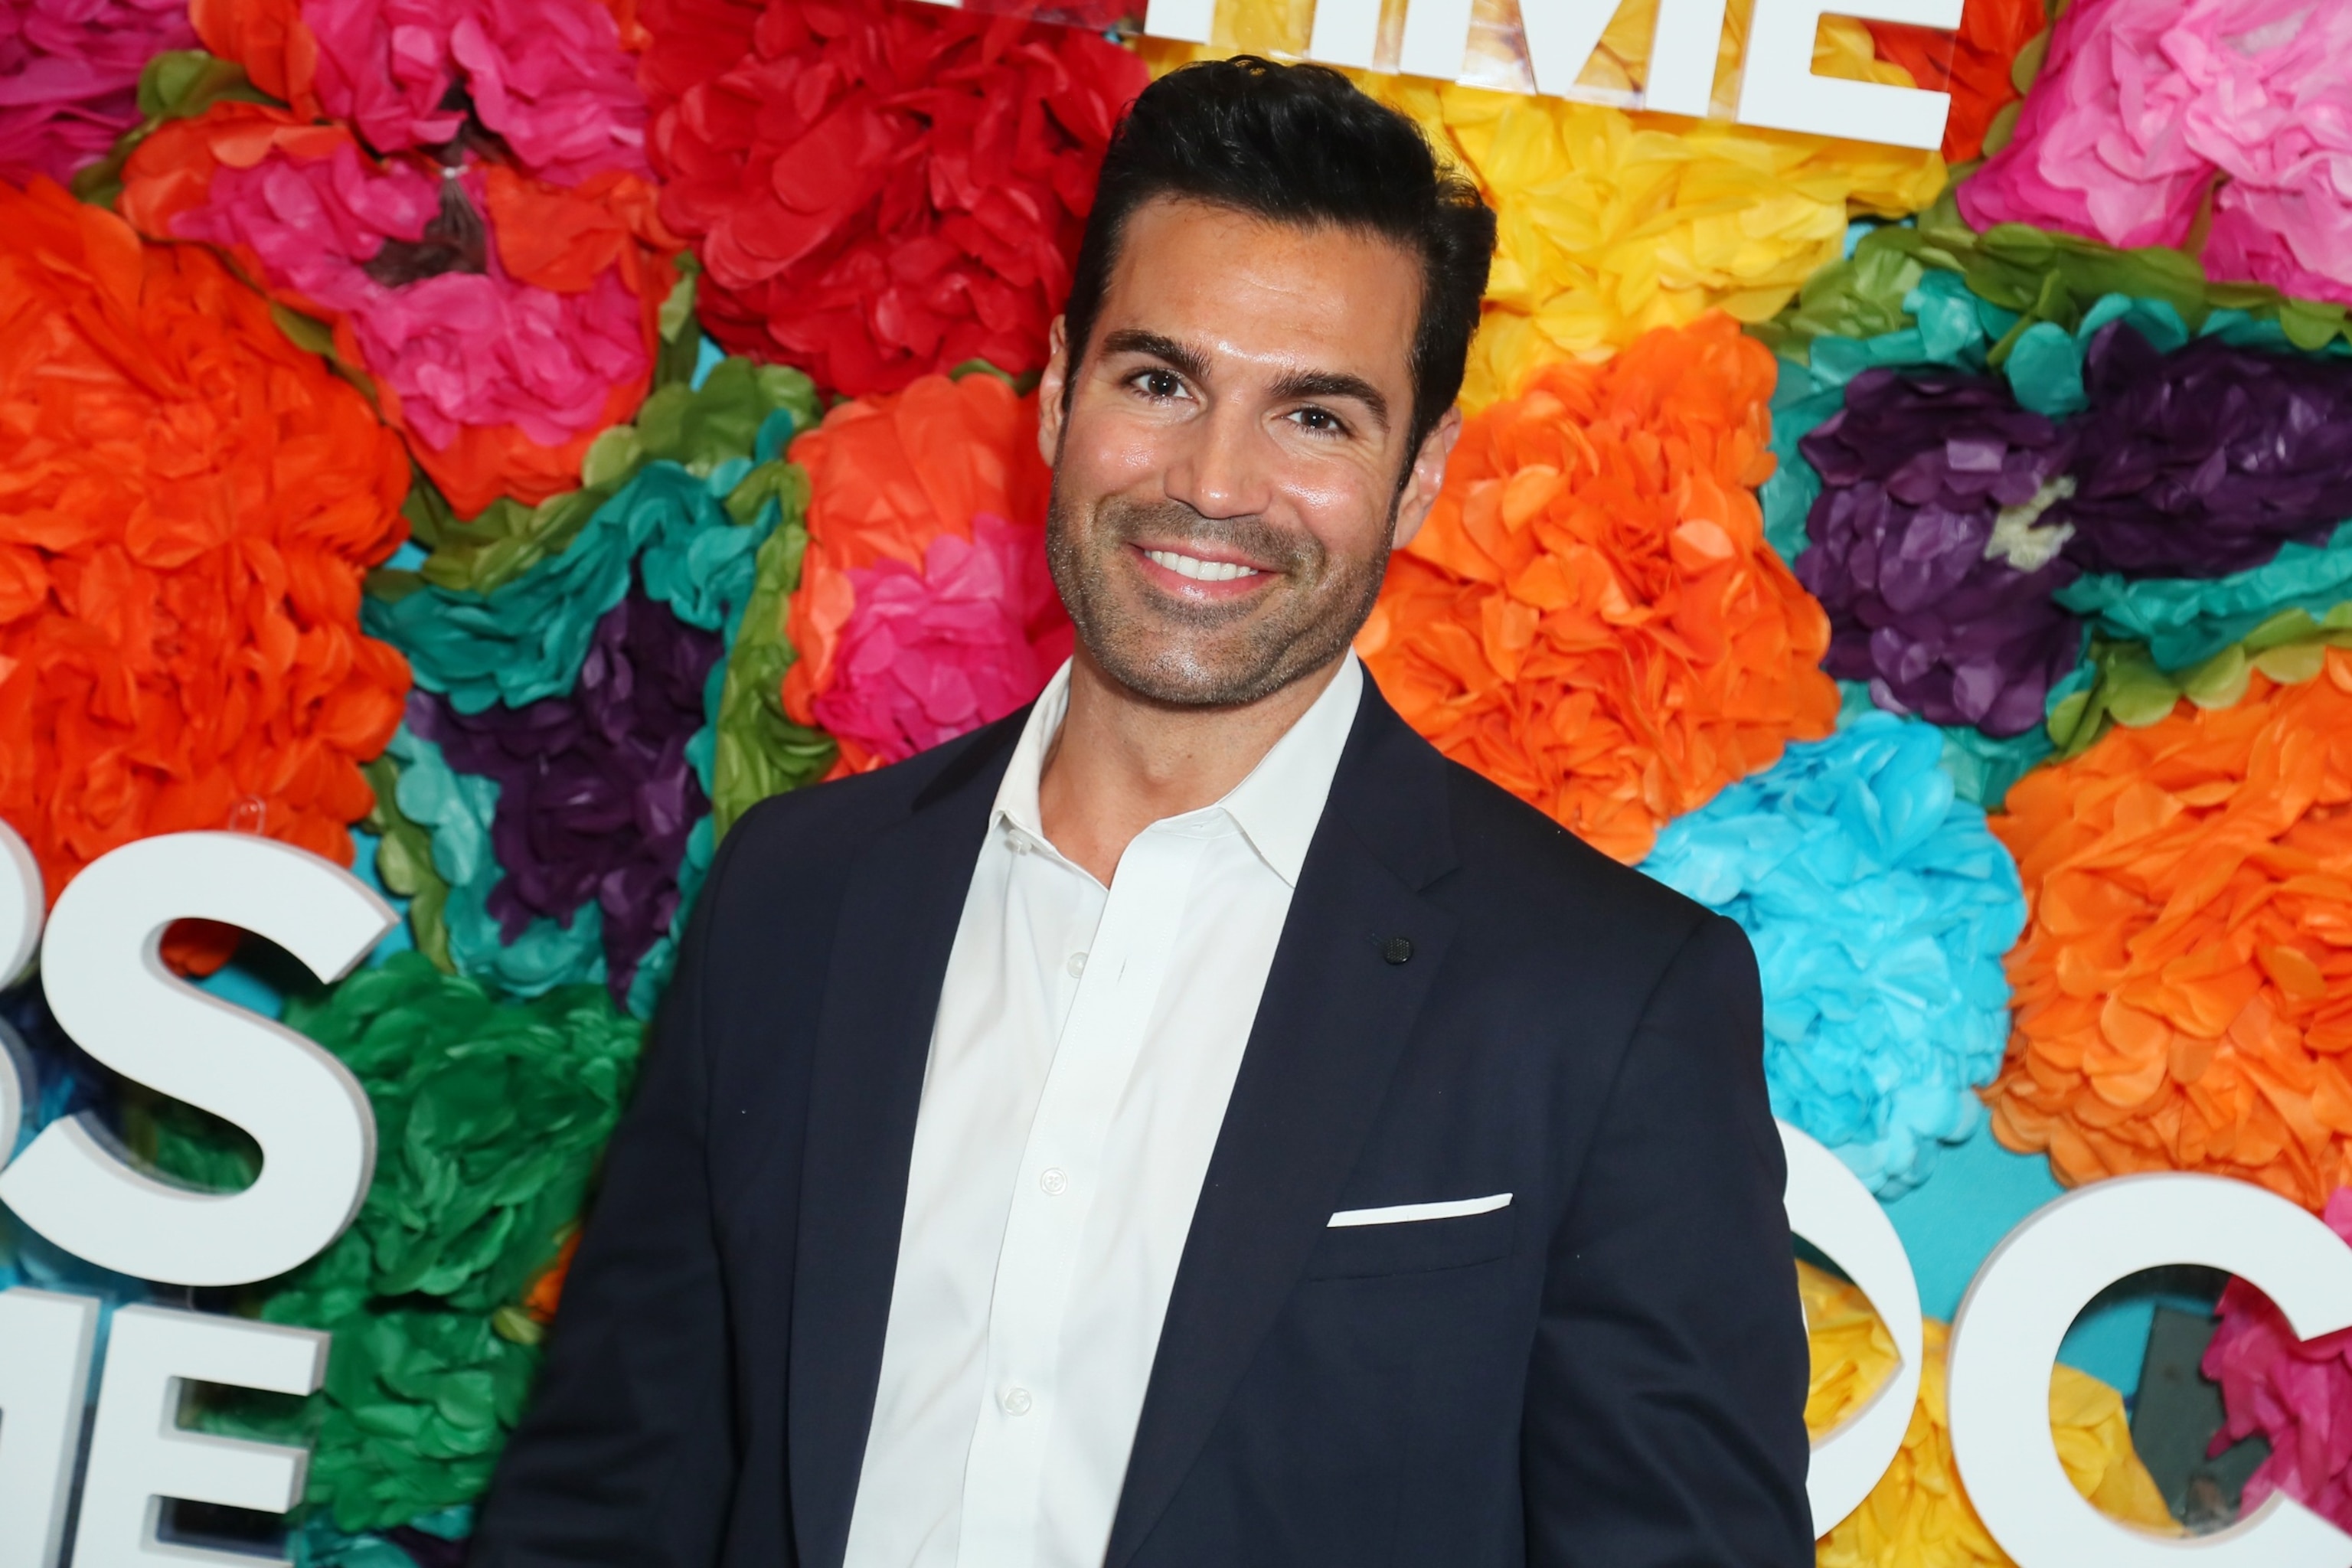 PHOTO: Jordi Vilasuso attends CBS Daytime Emmy Awards After Party at Pasadena Convention Center, May 5, 2019, in Pasadena, Calif.